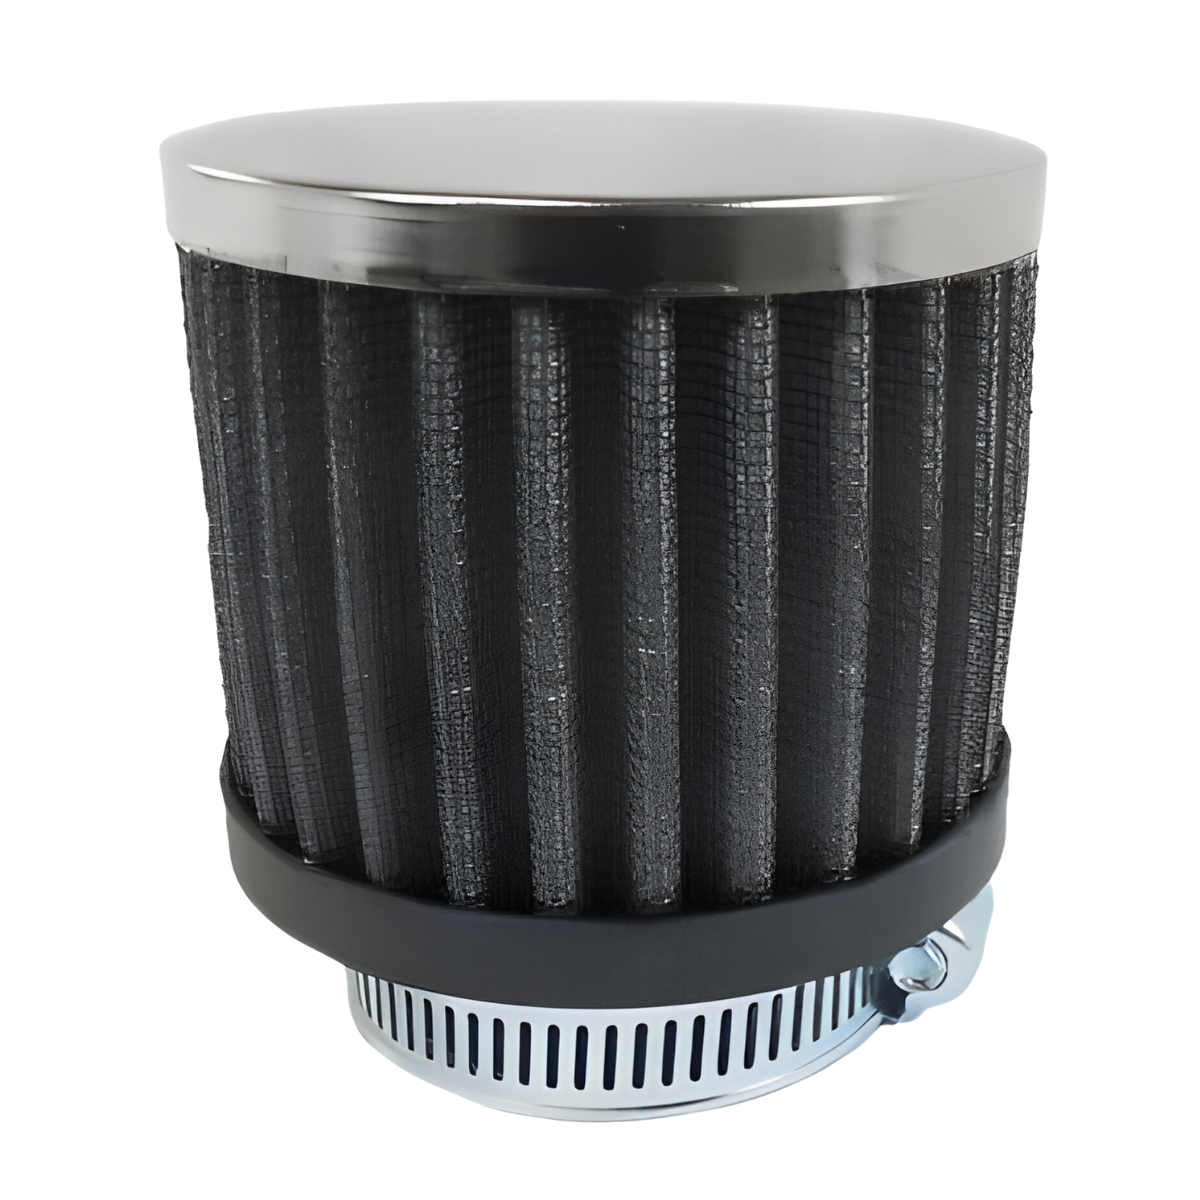 Racing Power Company R9309BK Clamp-On 3 inch Tall Filter Breather With 1 1/2 inch Id